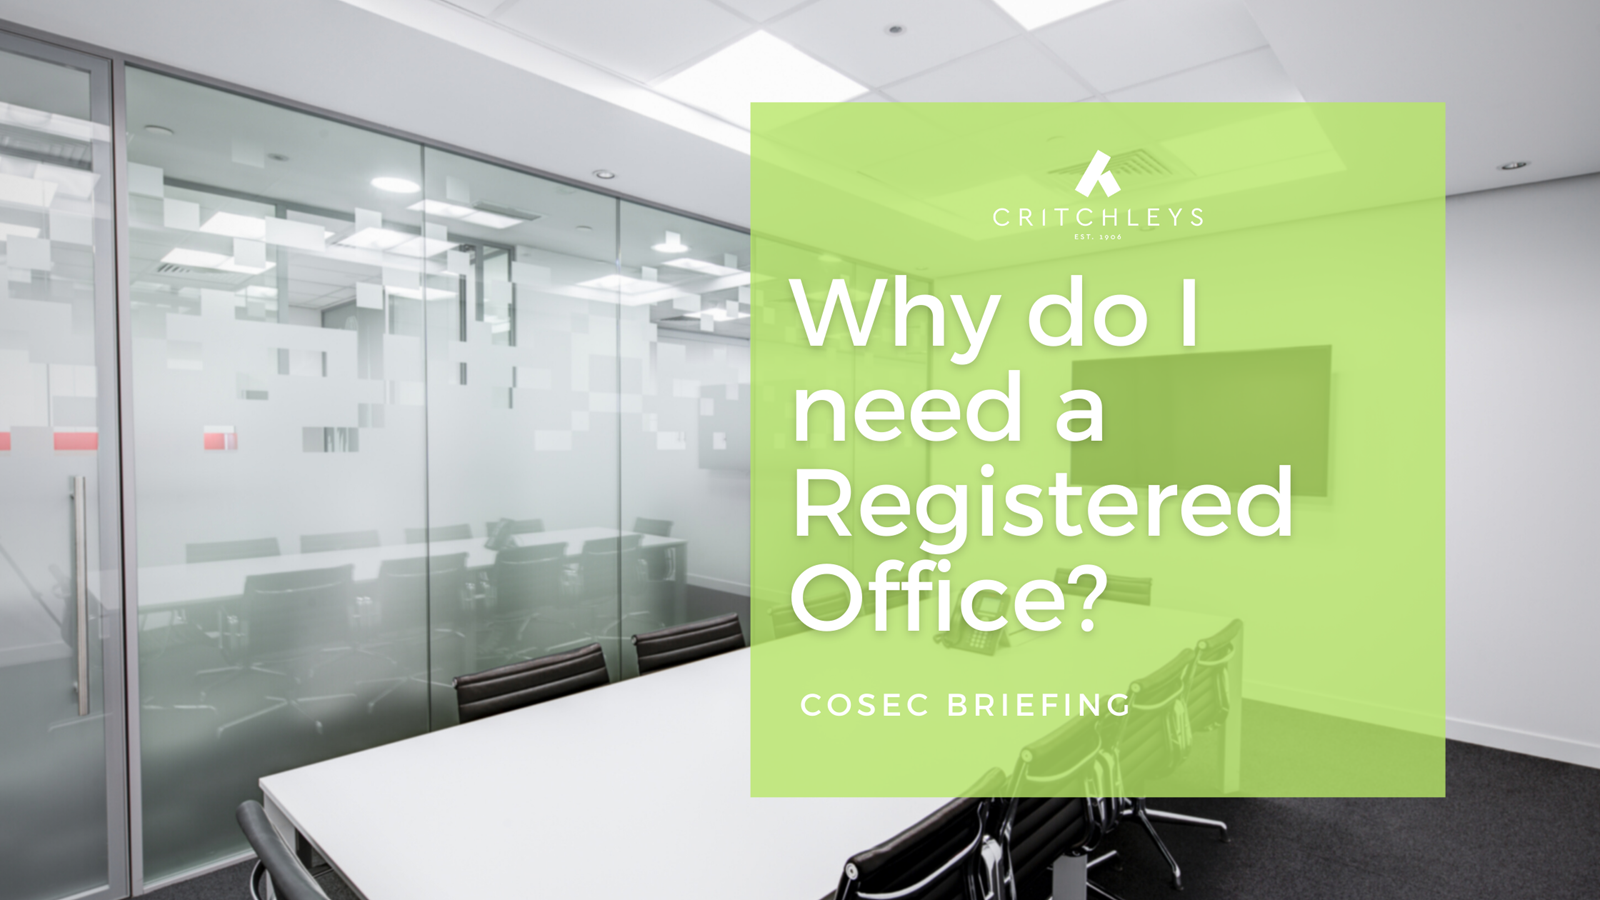 Why do I need a Registered Office?